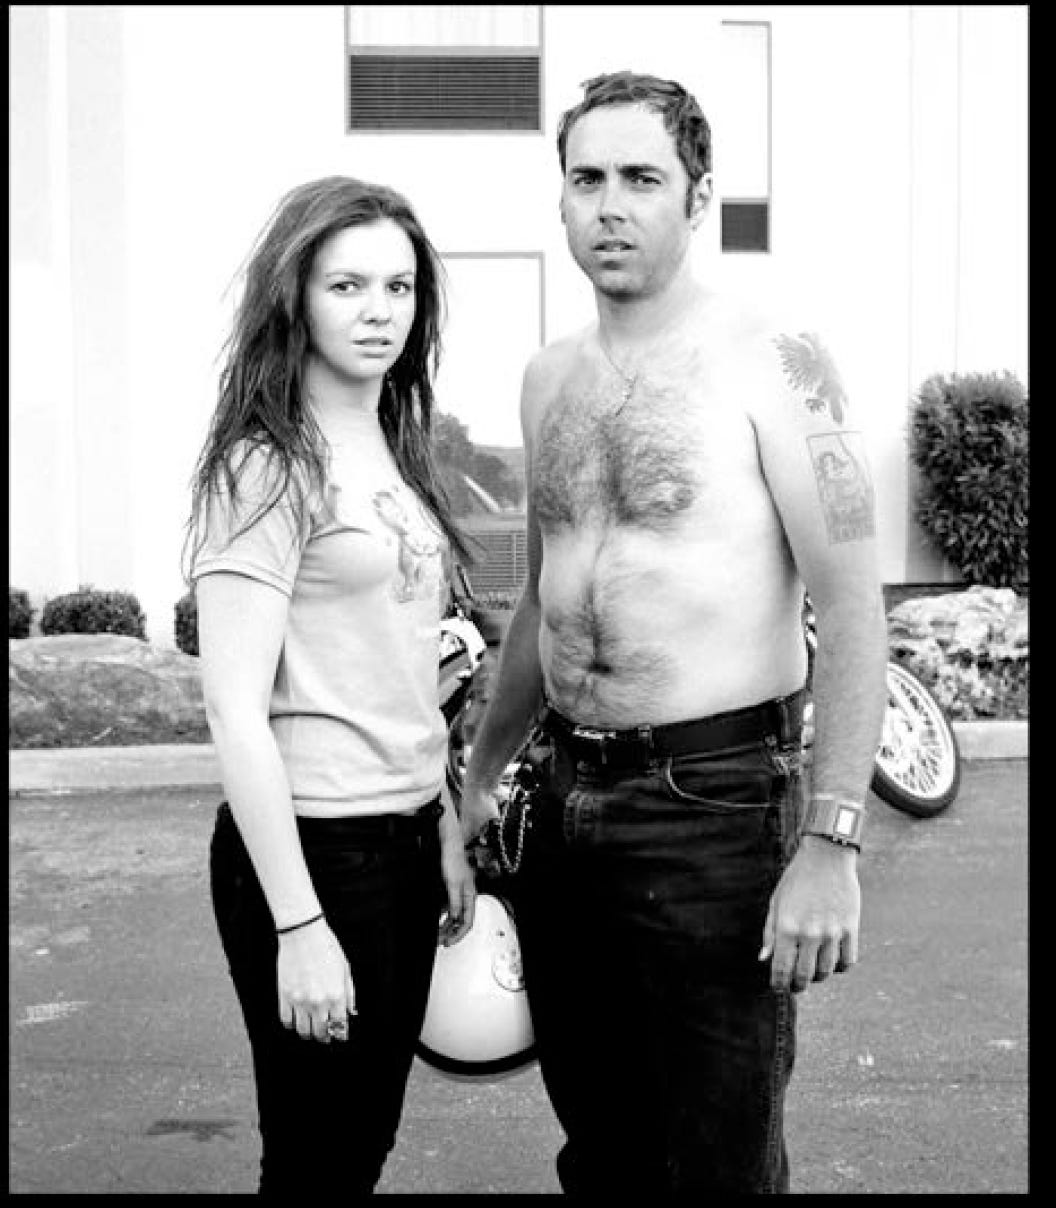 Amber and Derrick standing in a parking lot. The both are turned in, facing each other slightly, but looking toward camera. Derrick is shirtless. They both wear odd/tired expressions. Behind them, the motorcycle can be seen partially. 